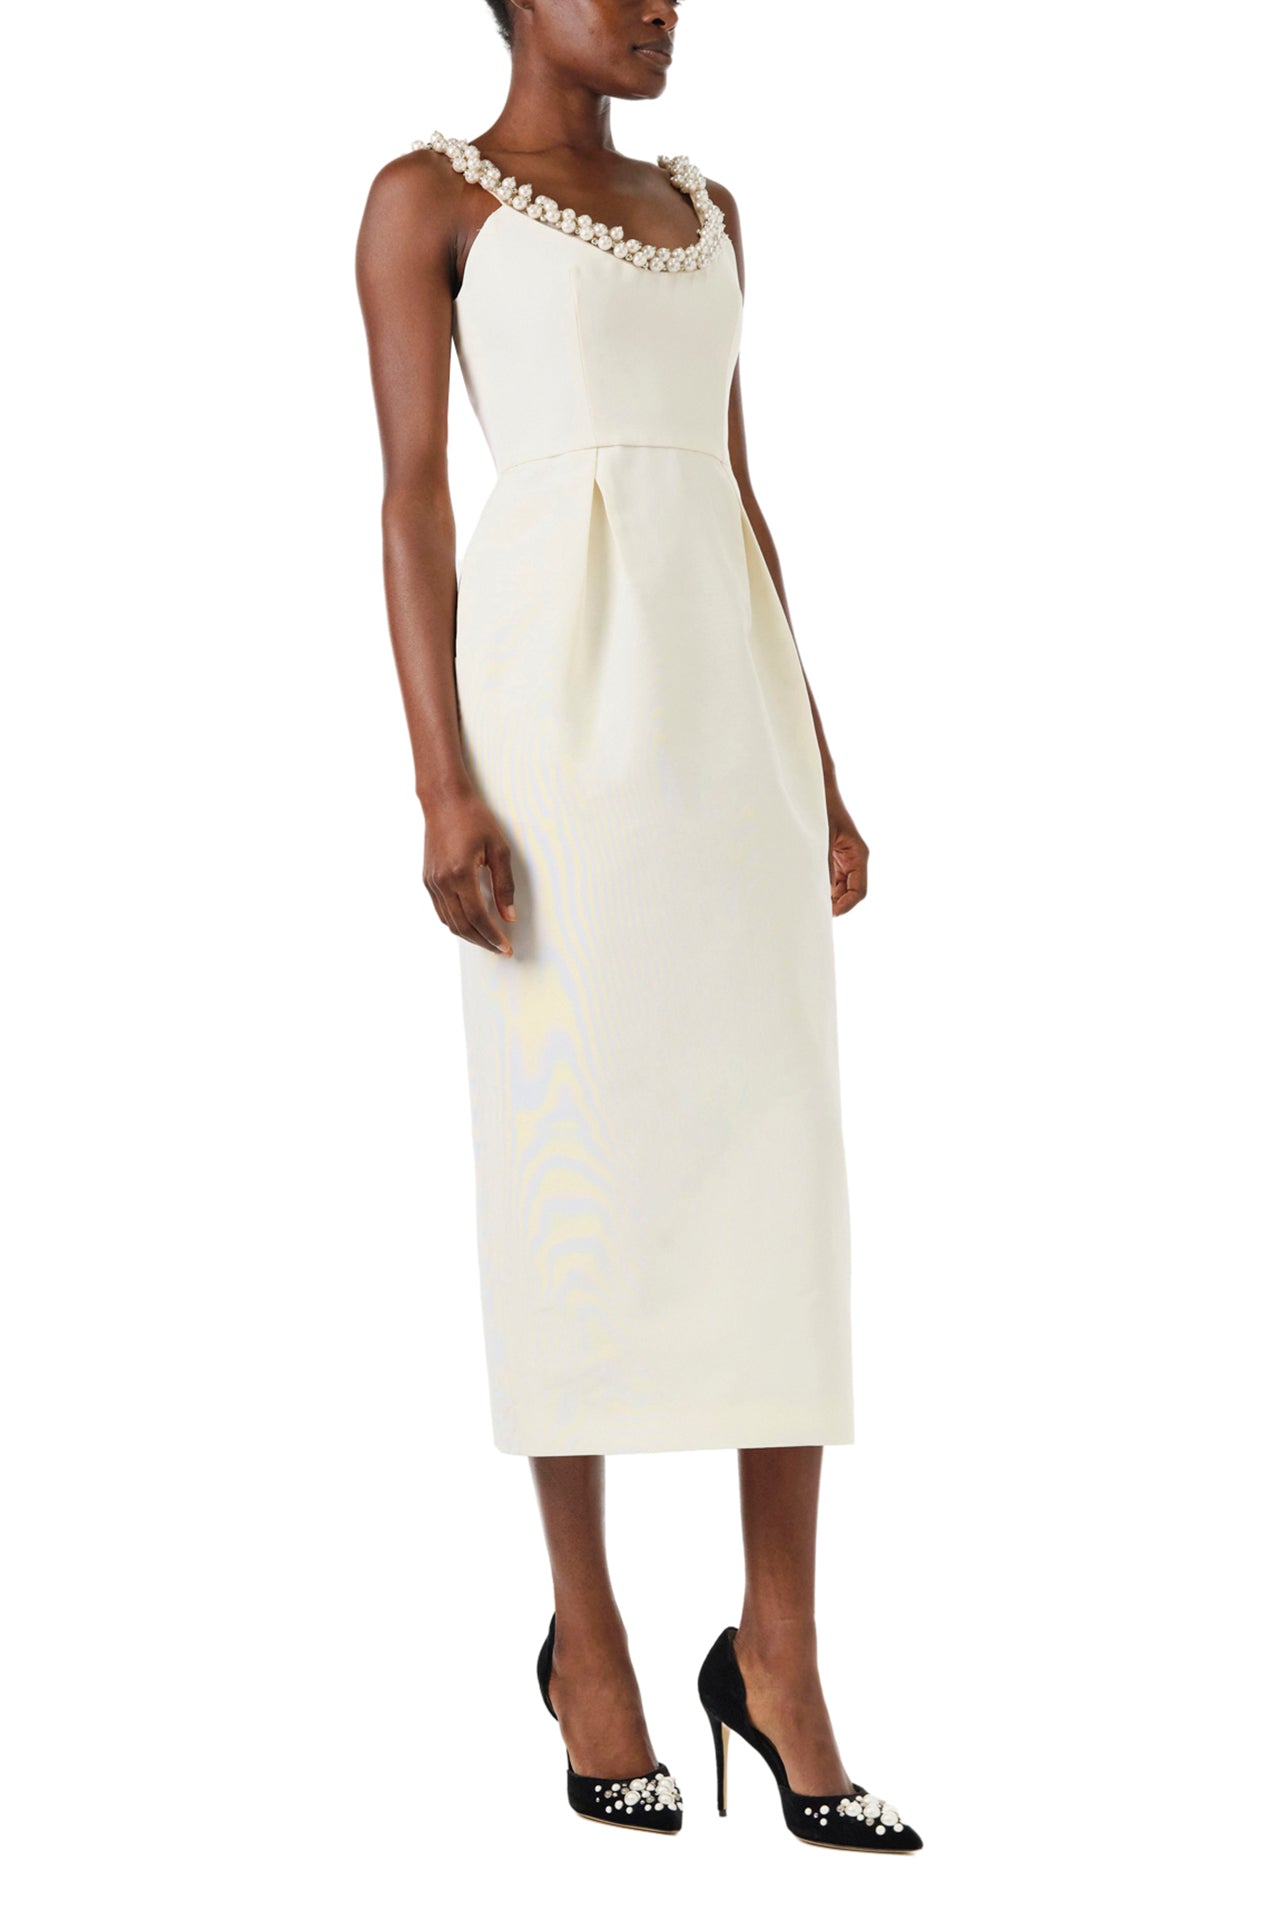 Monique Lhuillier Fall 2024 sleeveless, scoop neck cocktail dress with pearl embroidered neckline, low back, pockets, and natural waist seam - left side.